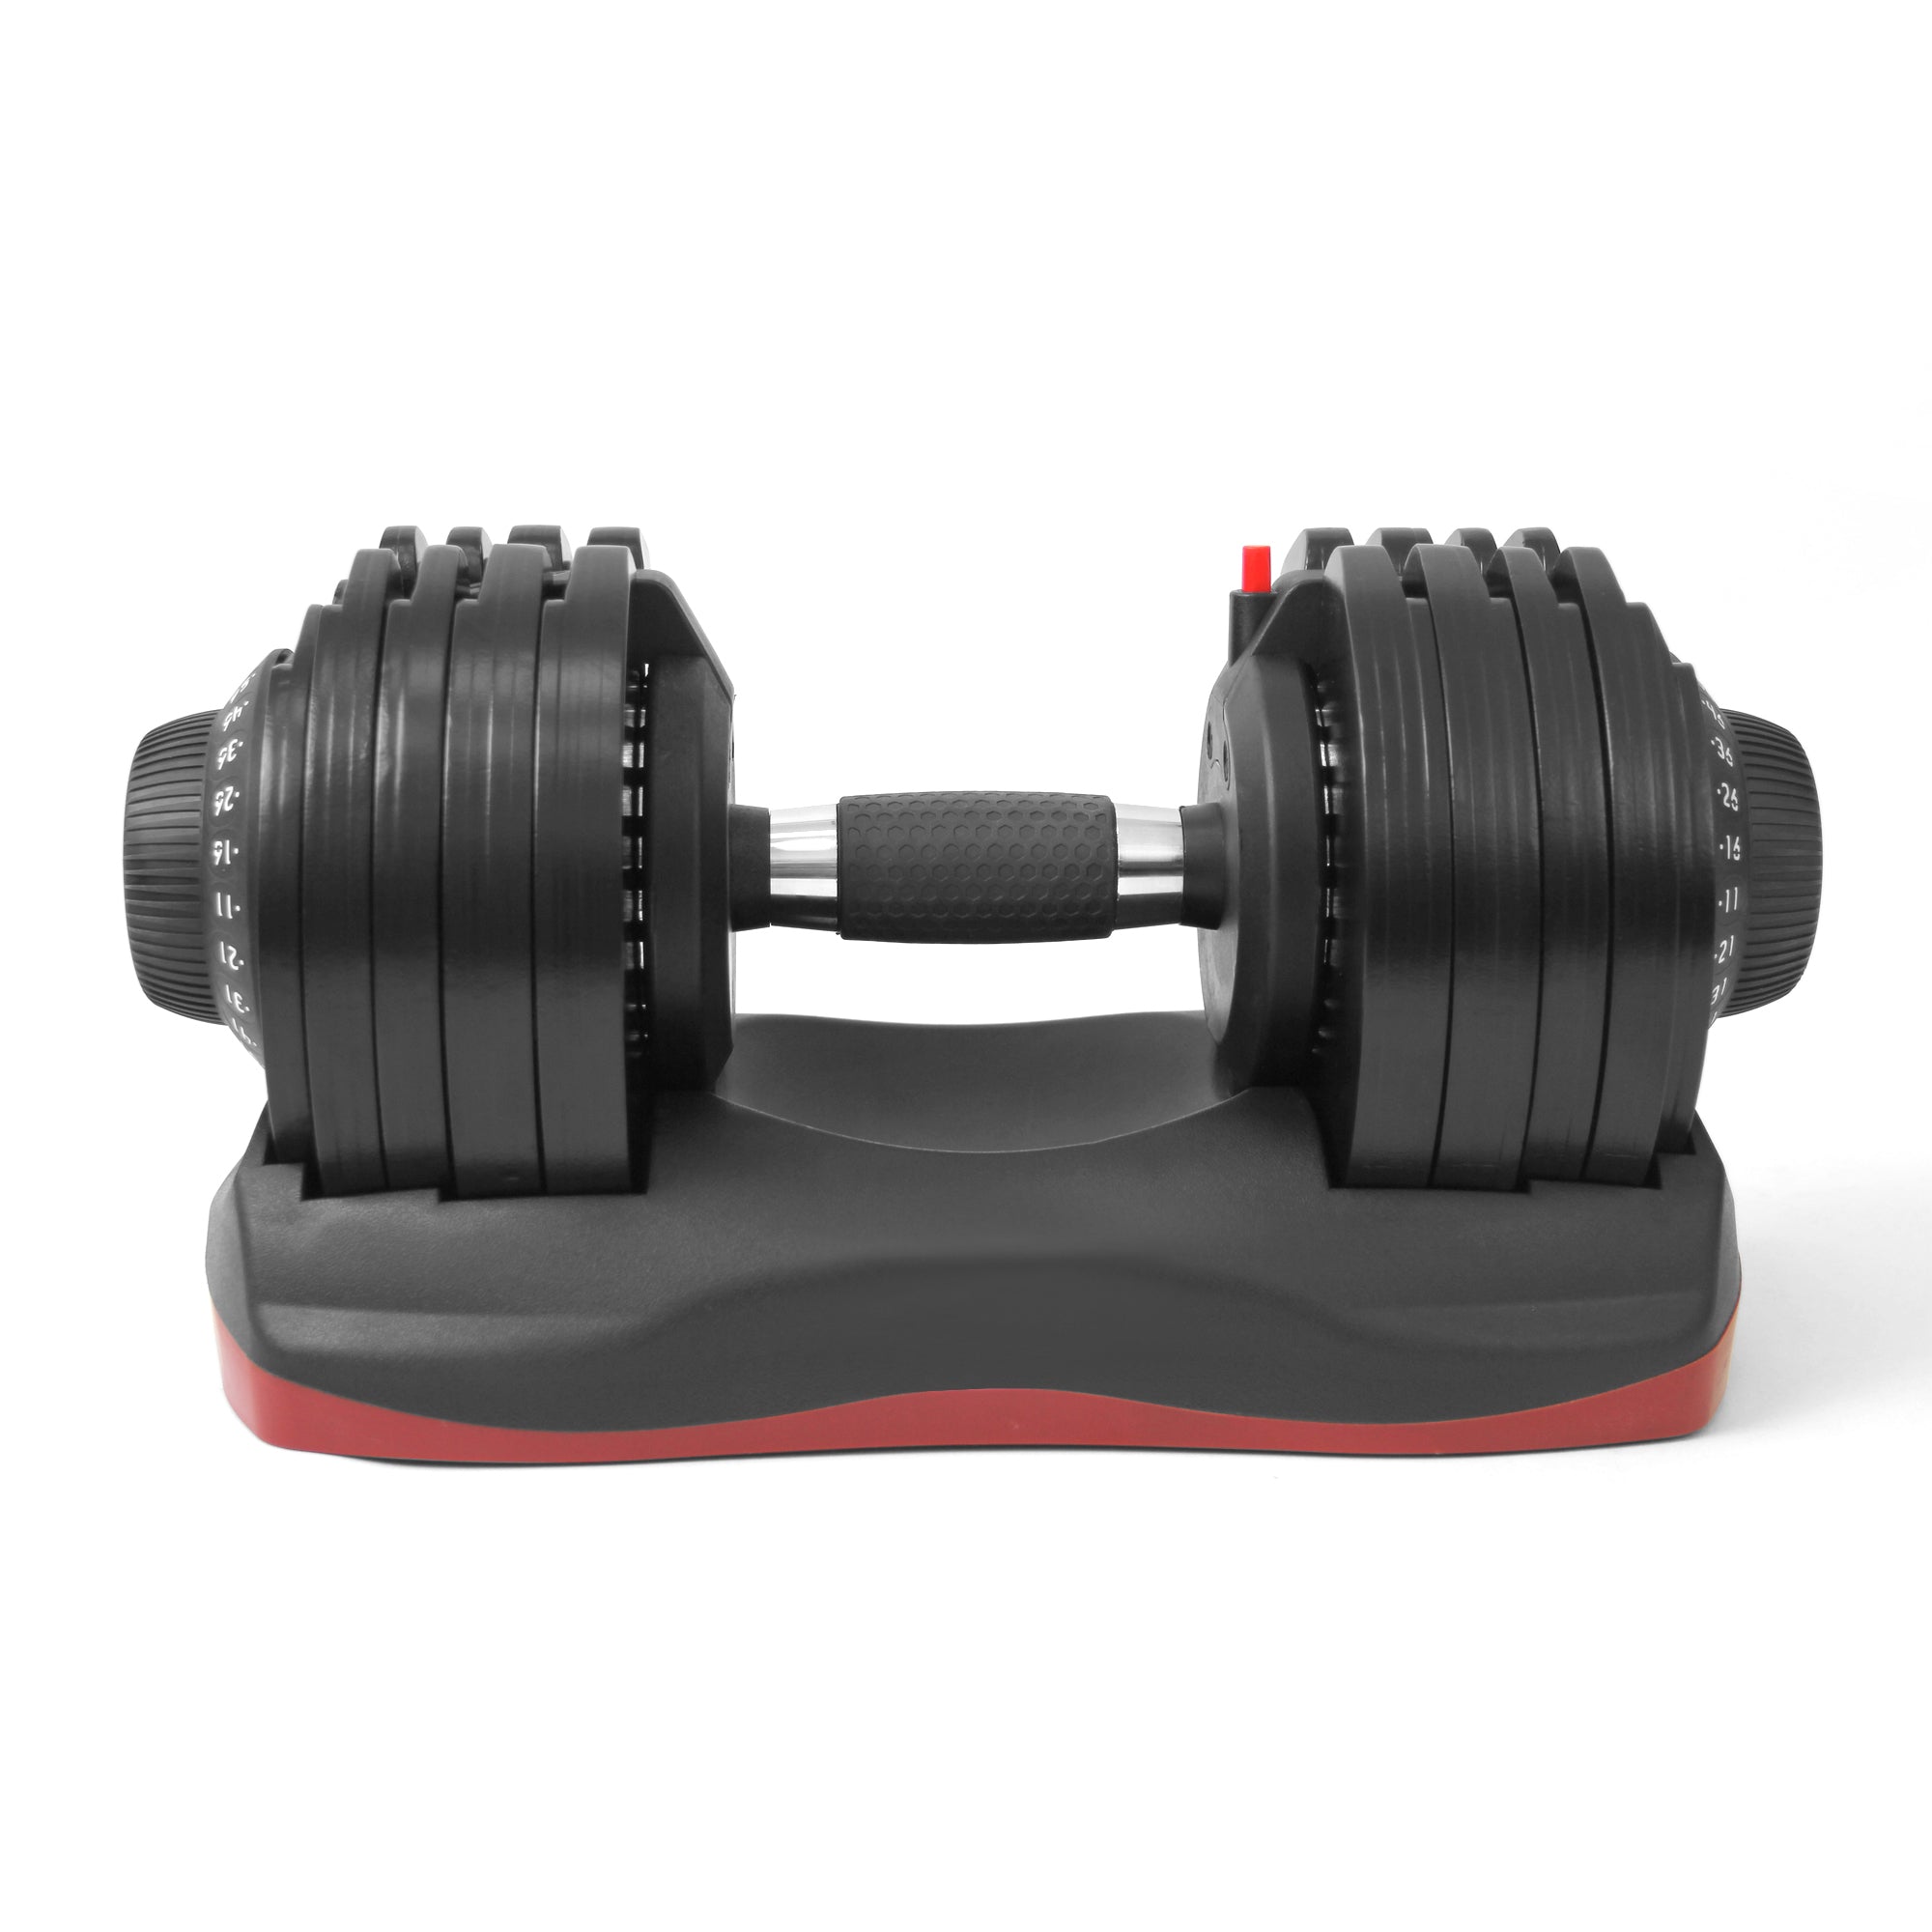 66 Lbs Adjustable Weight Dumbbell Set | DT1166